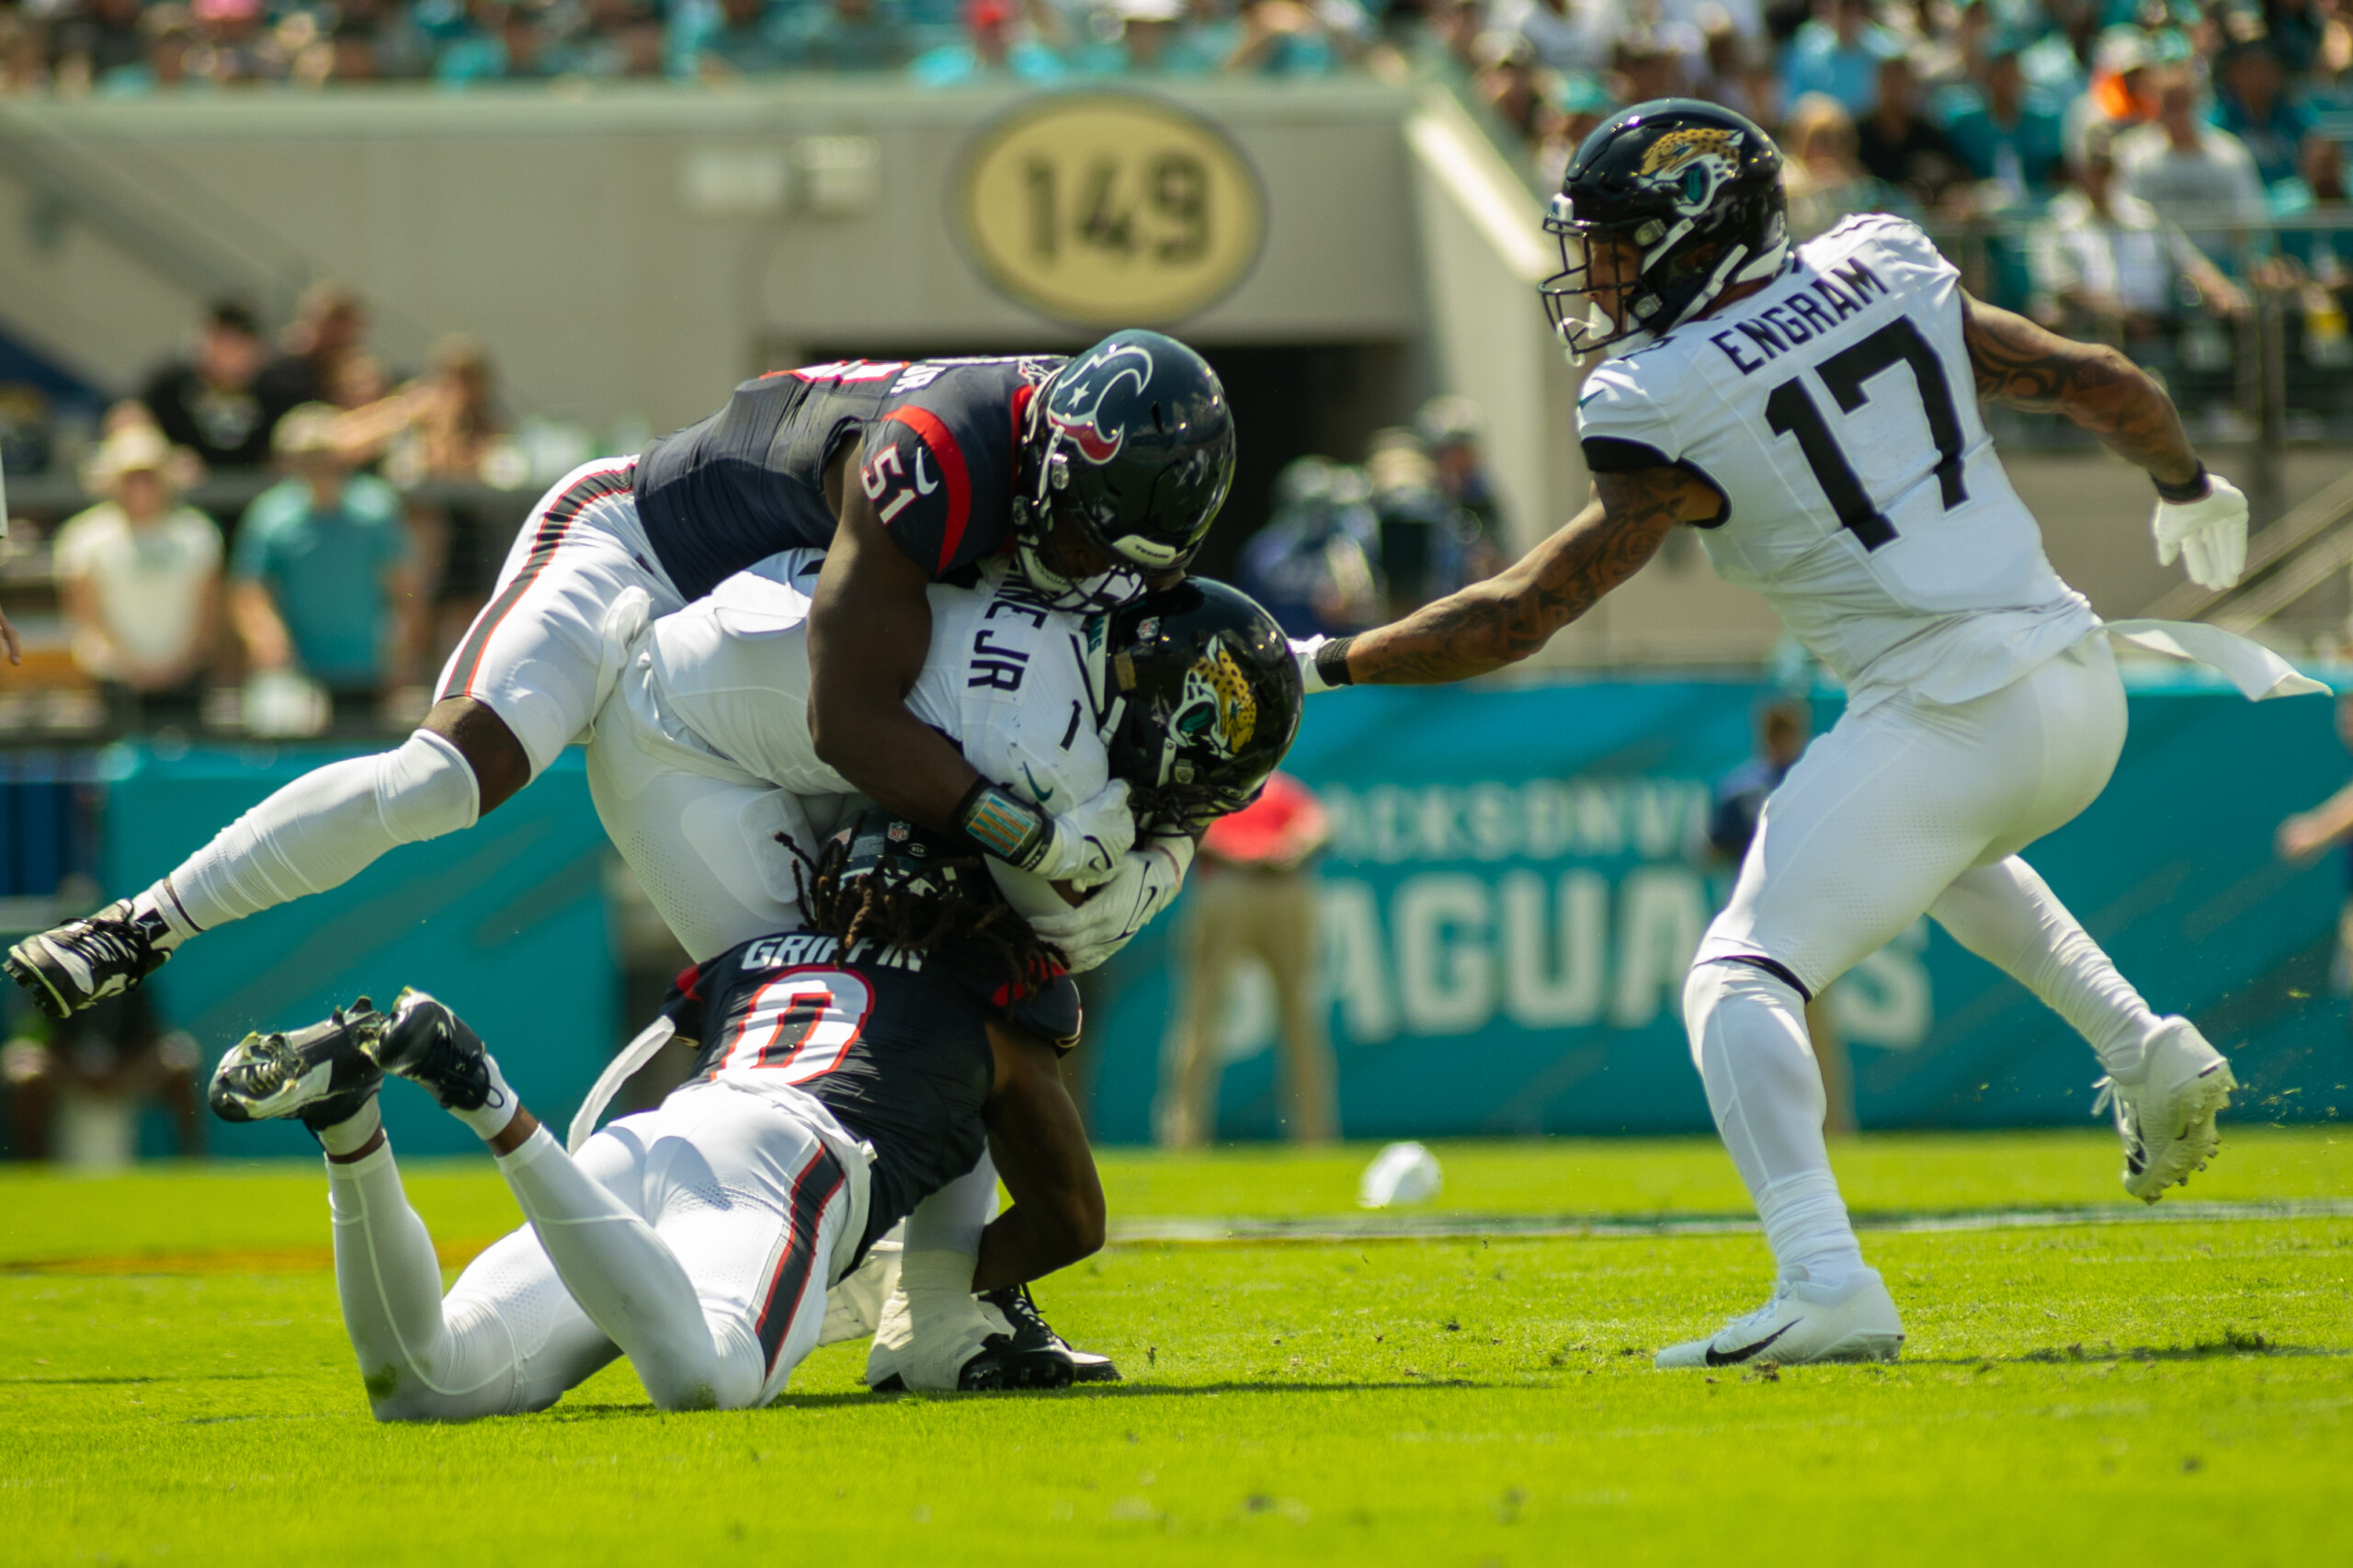 Featured image for “SPORTS | Jags’ brutal loss raises questions”